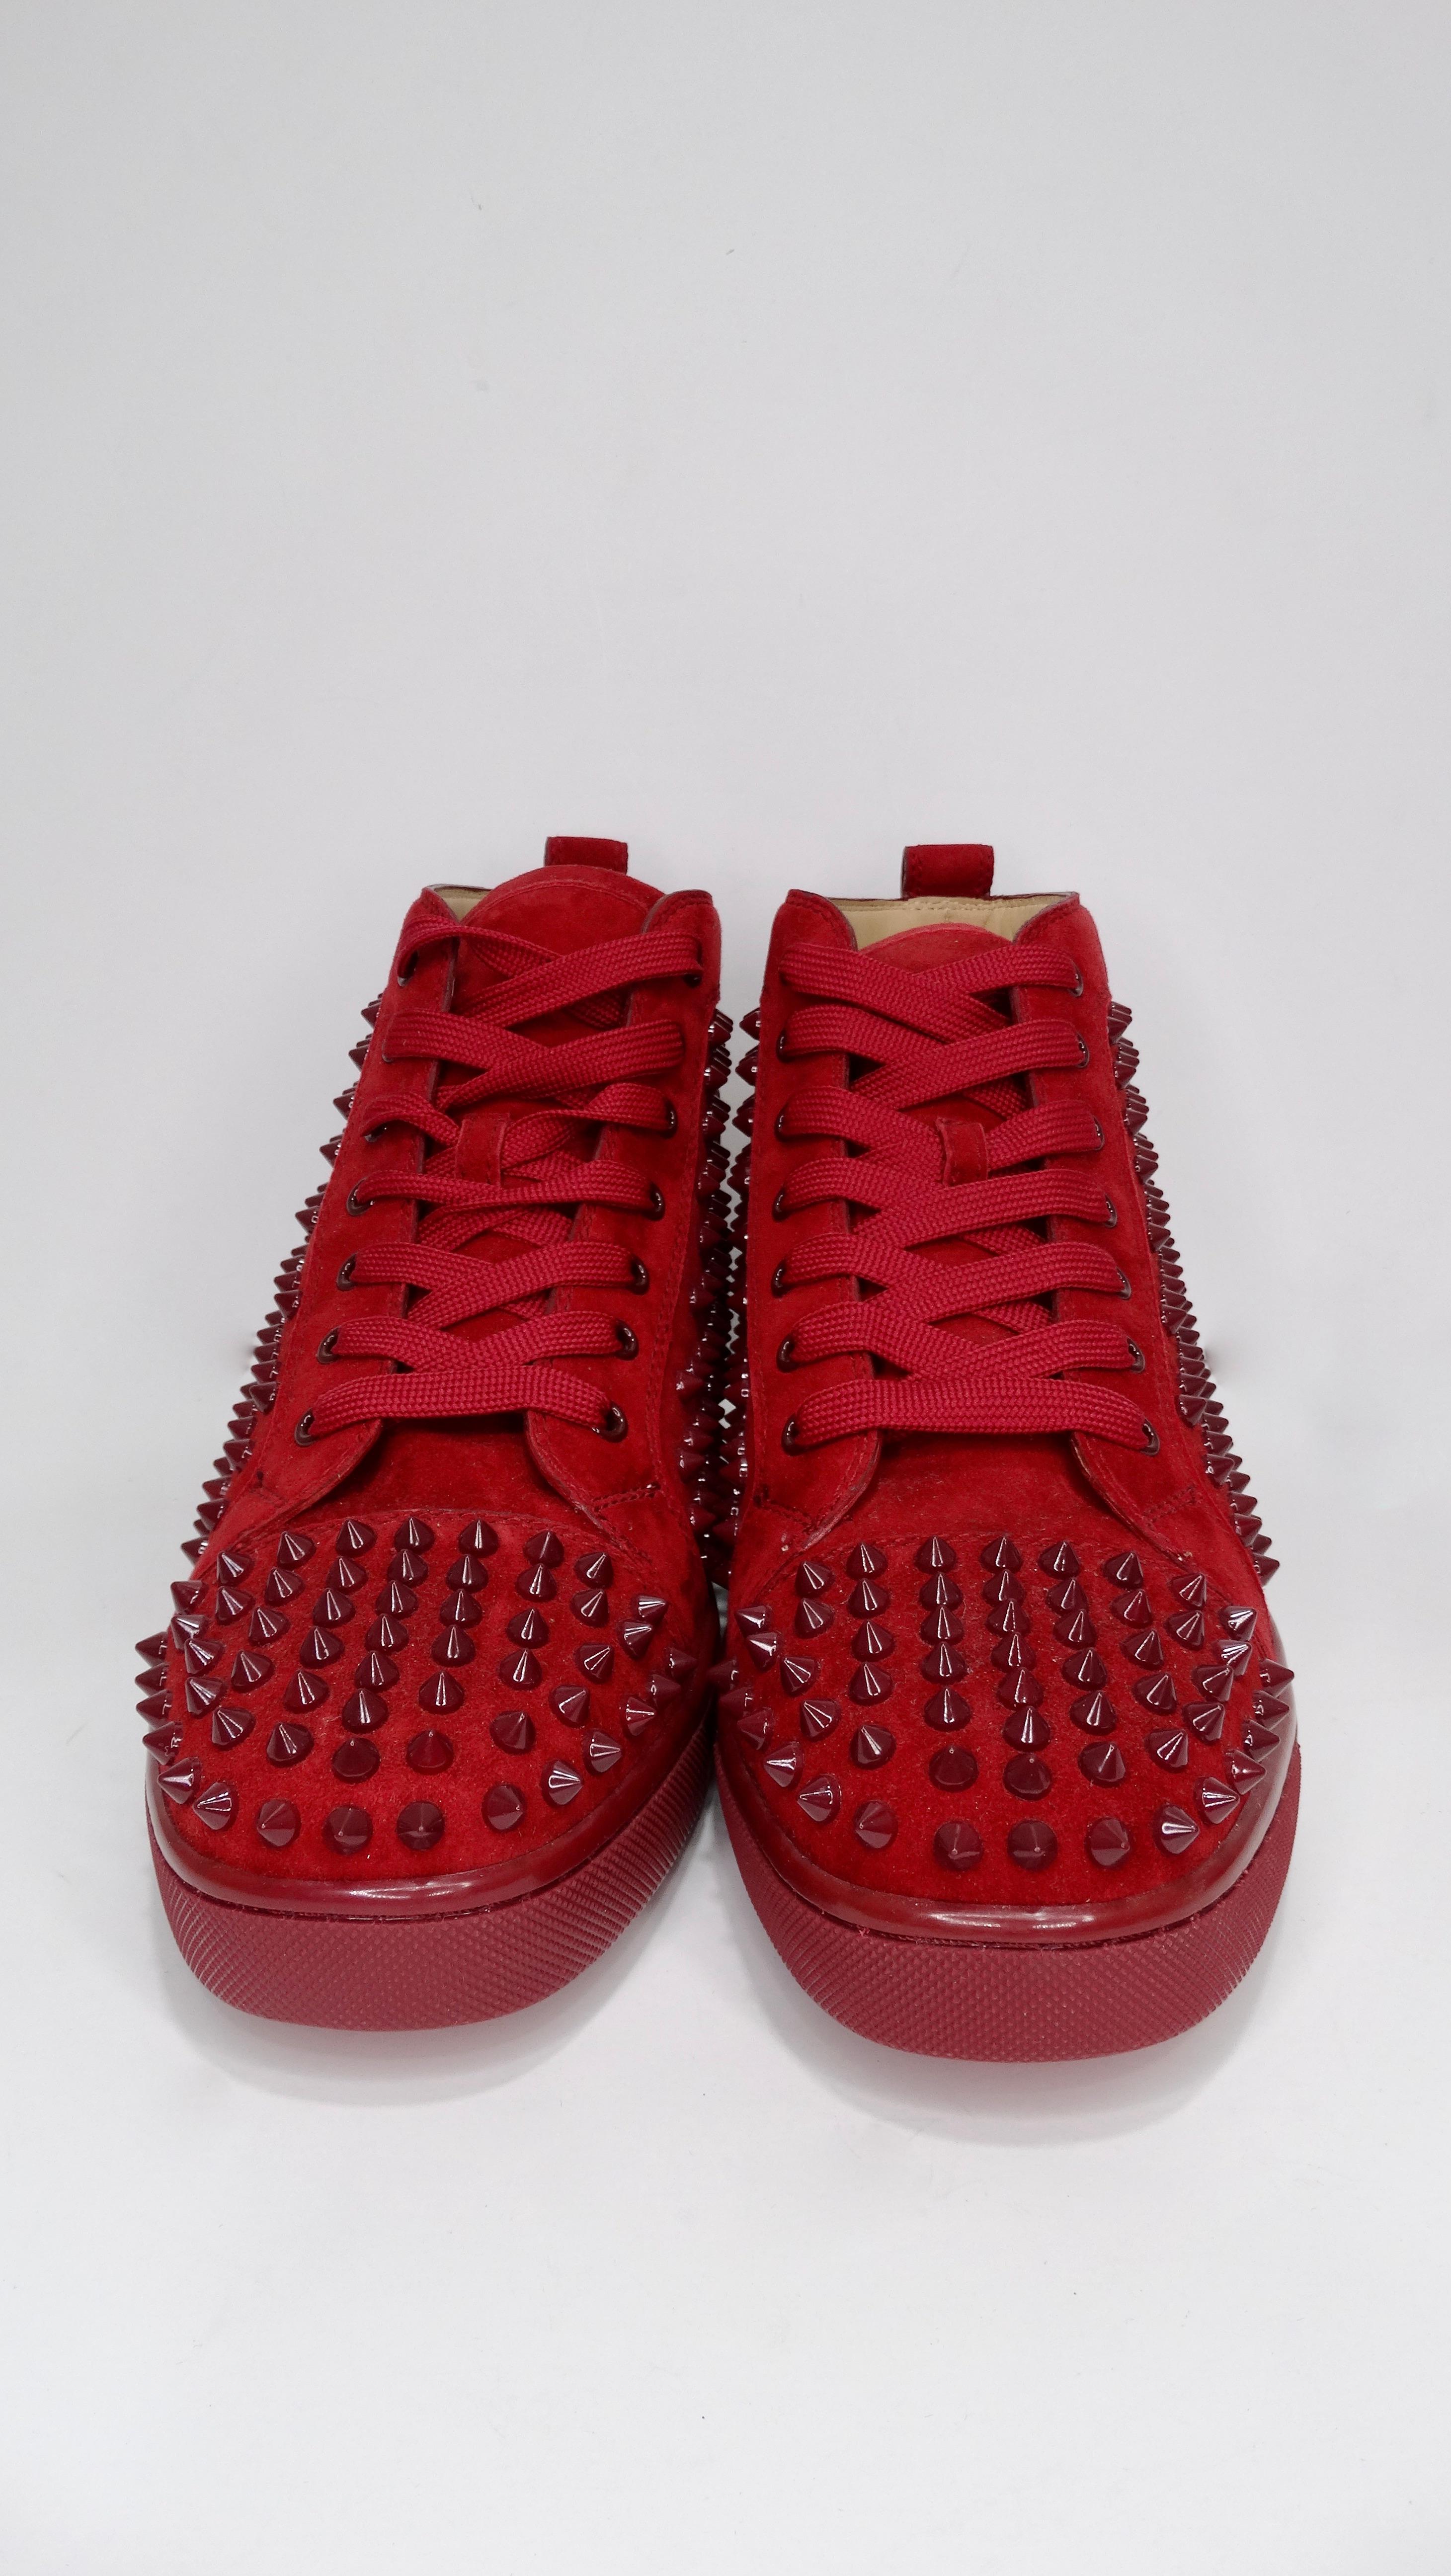 Elevate your look with these show stopping sneakers. Featuring a deep red suede and spikes throughout, these sneakers were originally created in 2009 and have had multiple variations and styles since then, including these from 2014. Pair with black